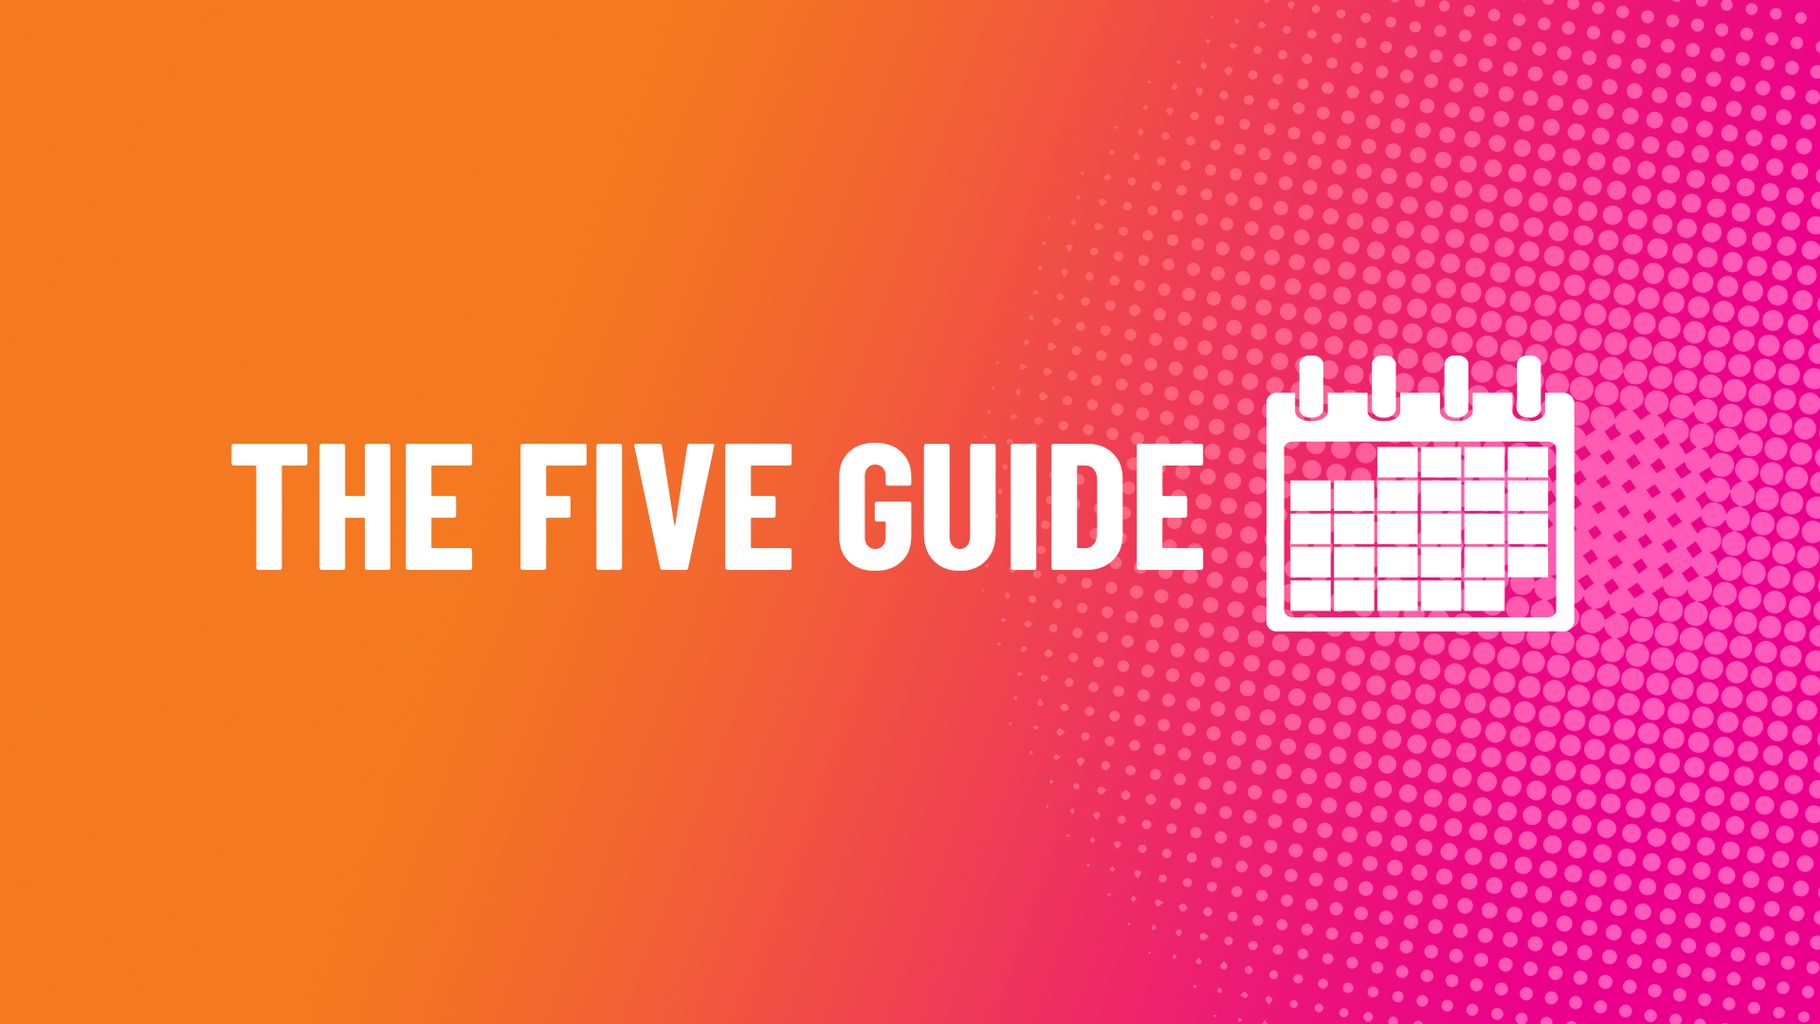 Fiveguide ?quality=80&format=jpg